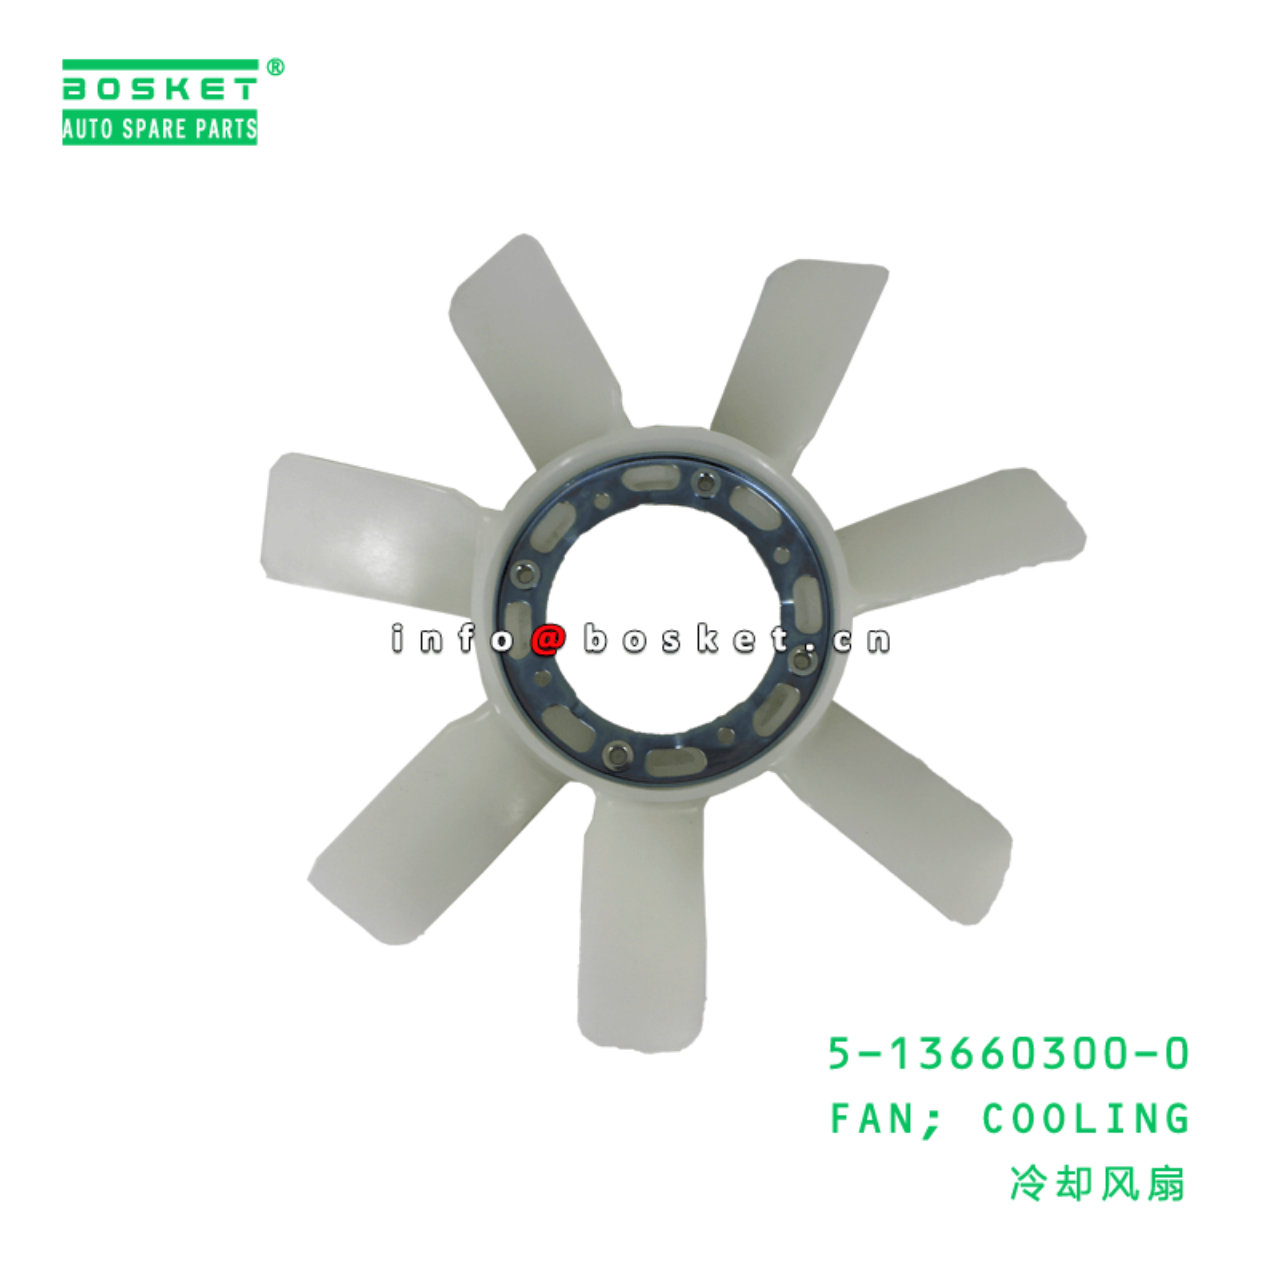 5-13660300-0 Cooling Fan 5136603000 Suitable for ISUZU TFR